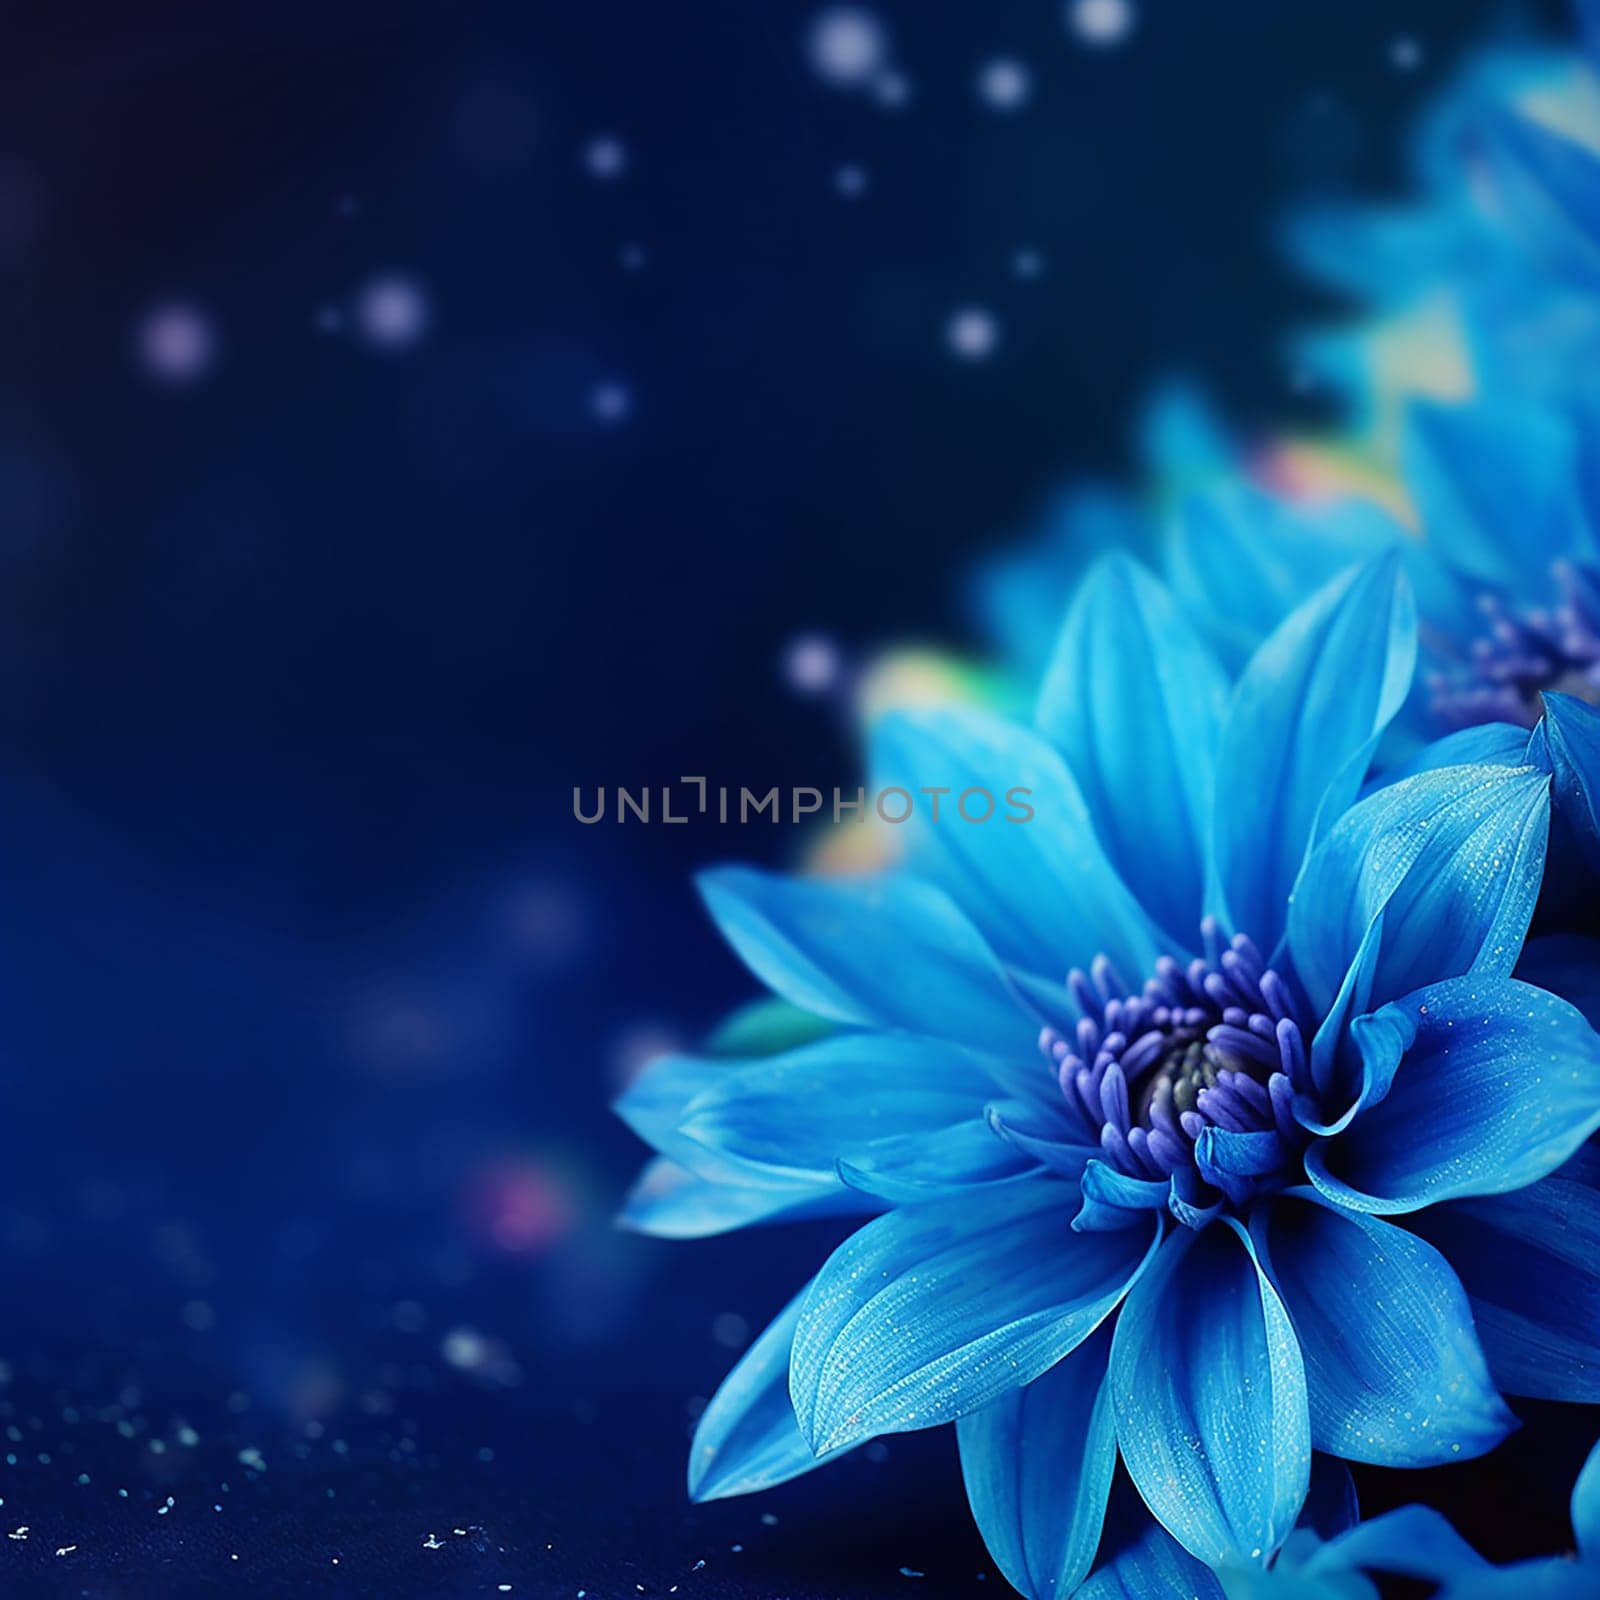 Vibrant blue flowers with a dark background, sparkles visible around petals.